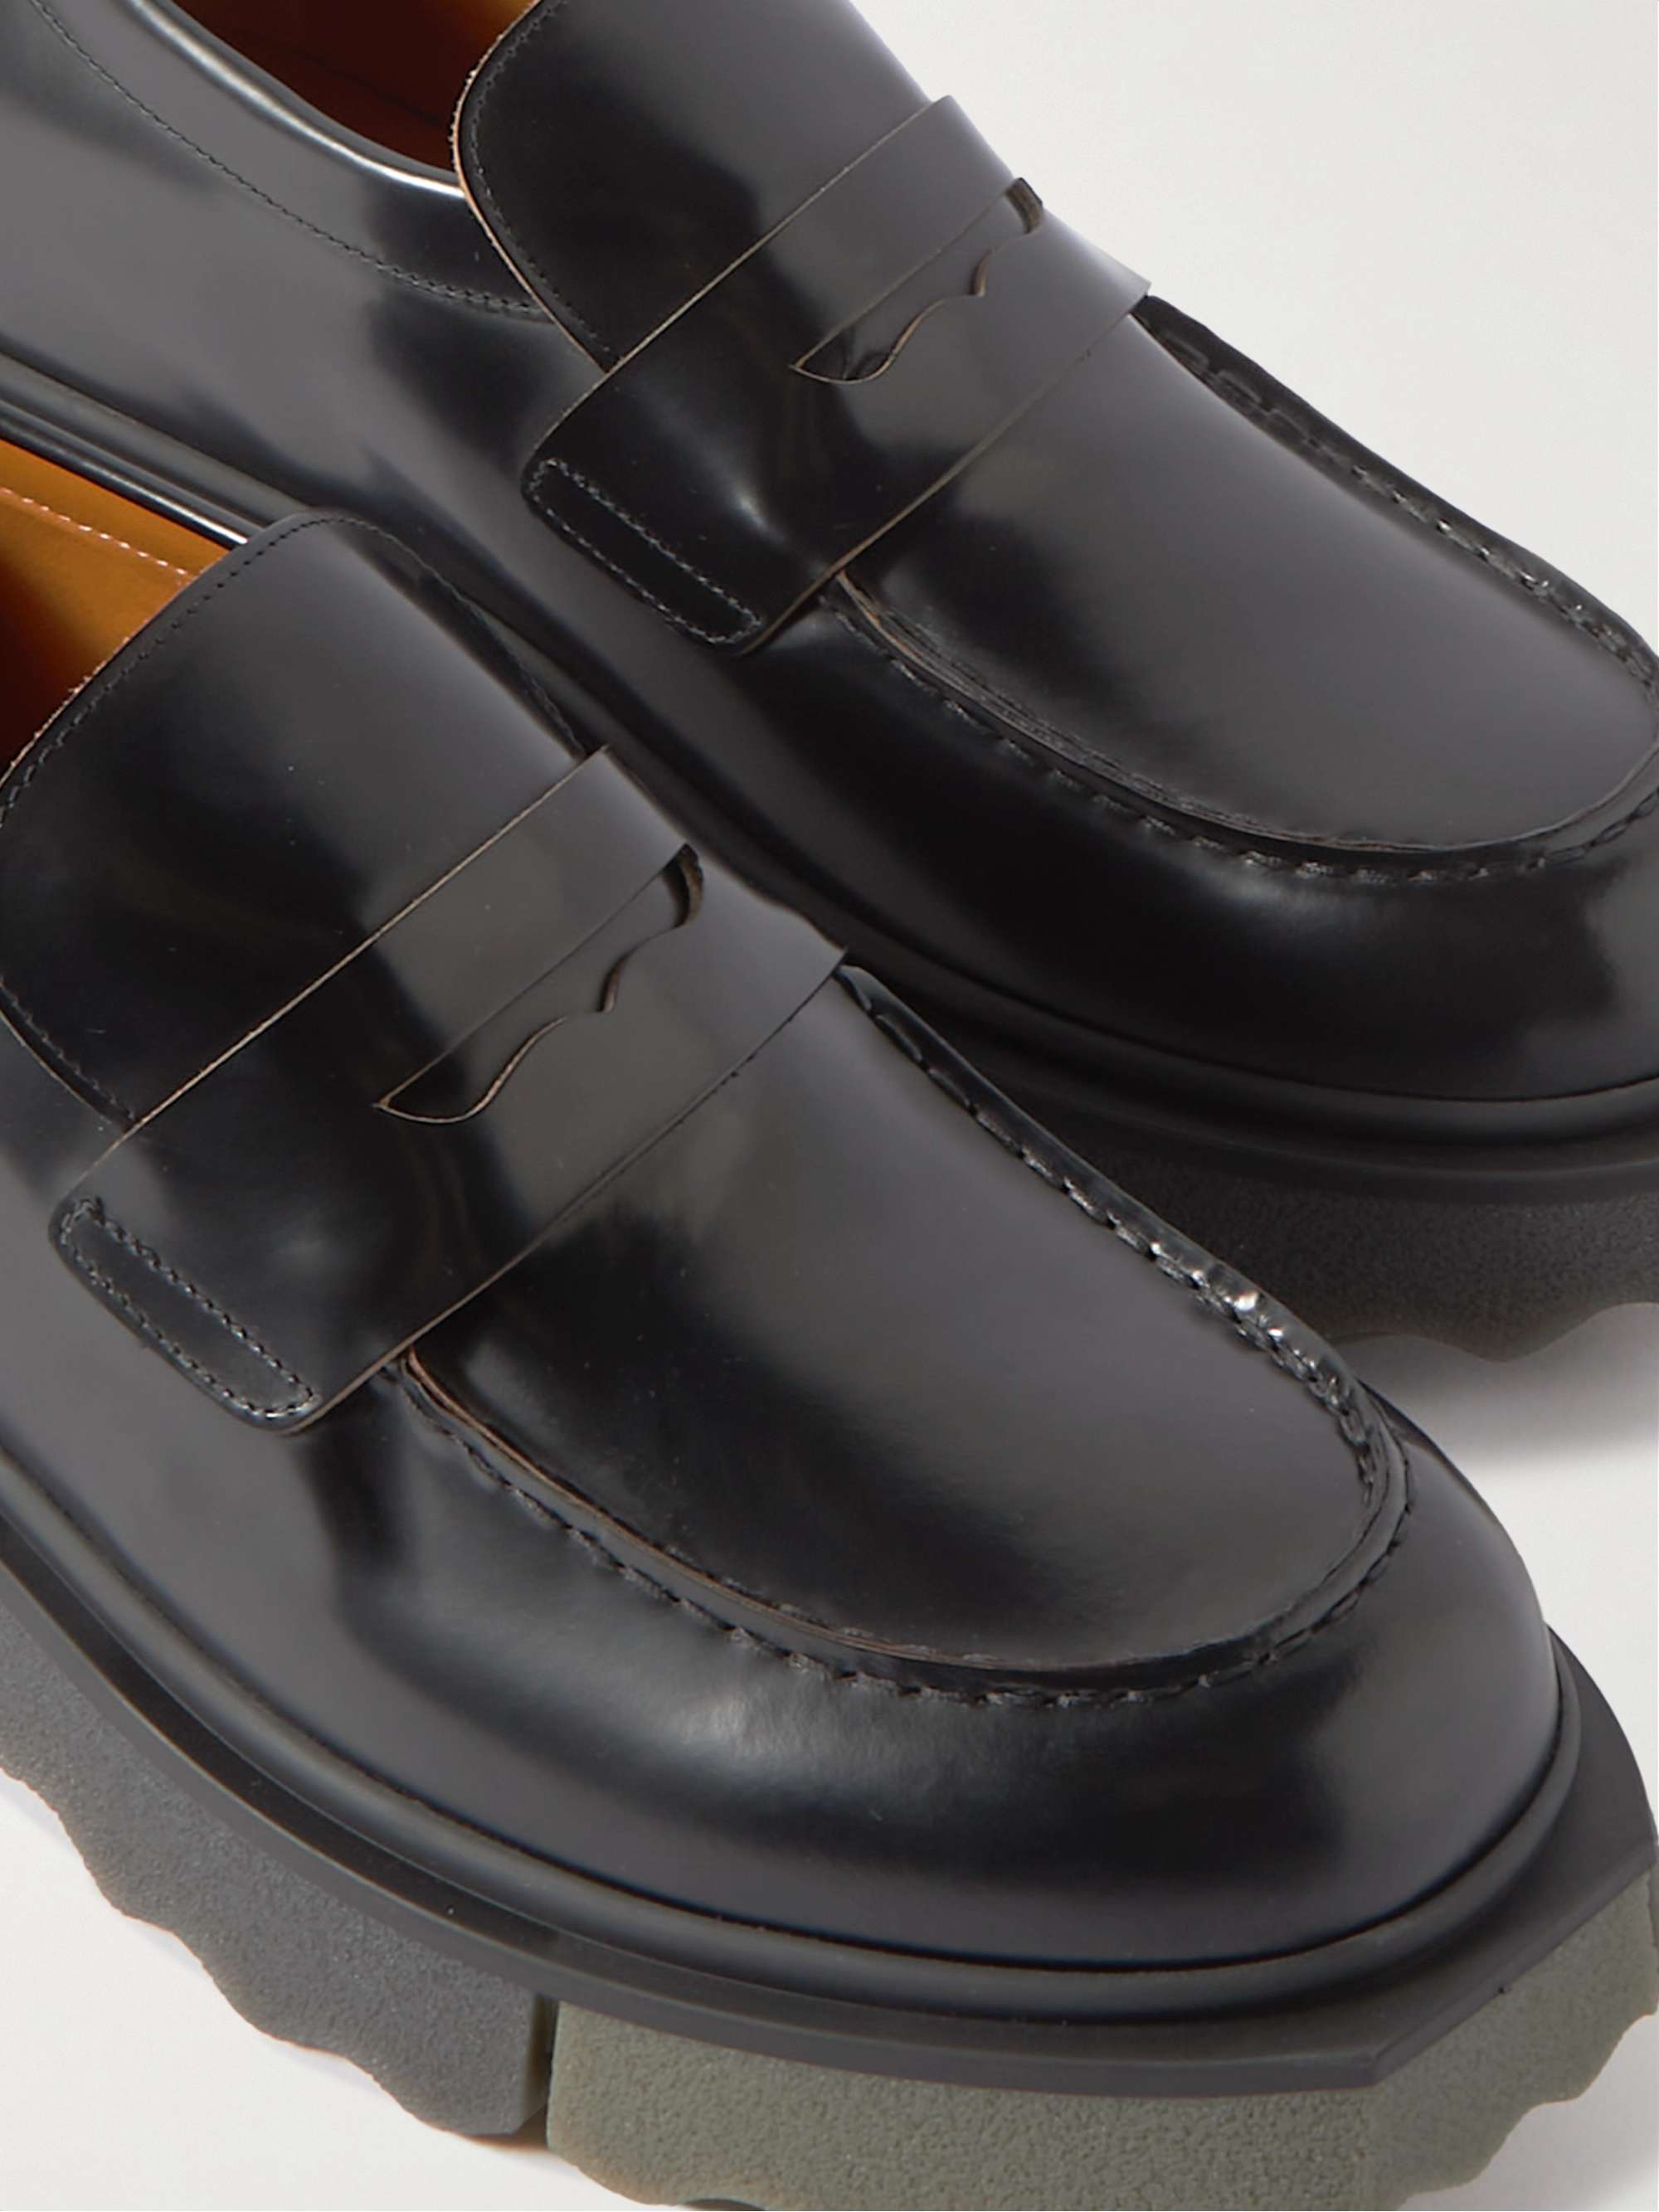 OFF-WHITE Leather Penny Loafers